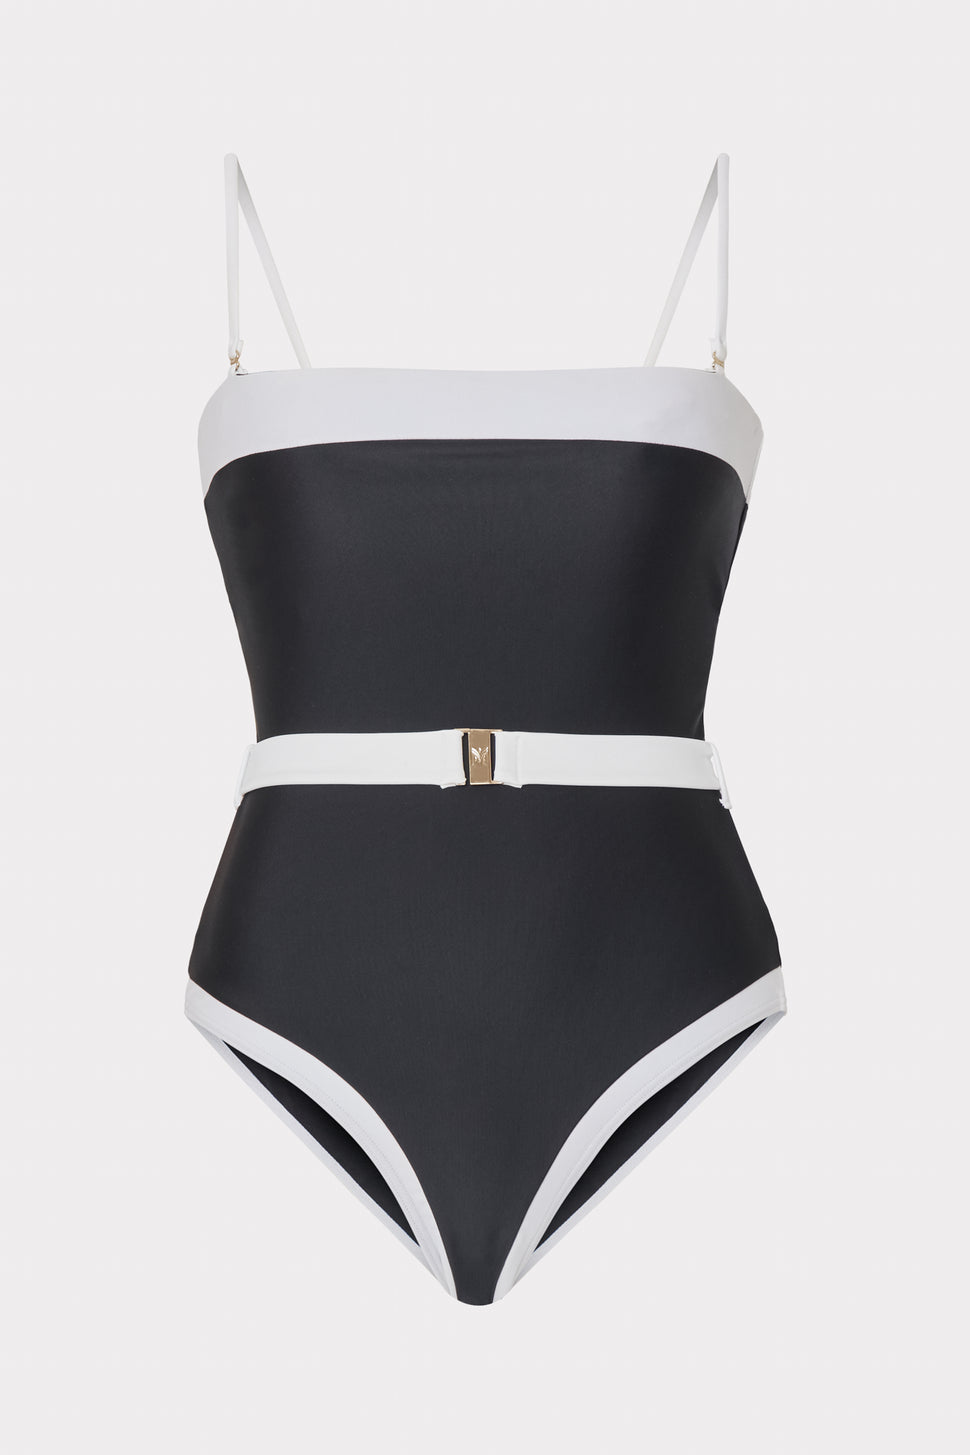 NWT 14 $188 SPANX Sexy Belted Bandeau Black and White One Piece Swimsuit